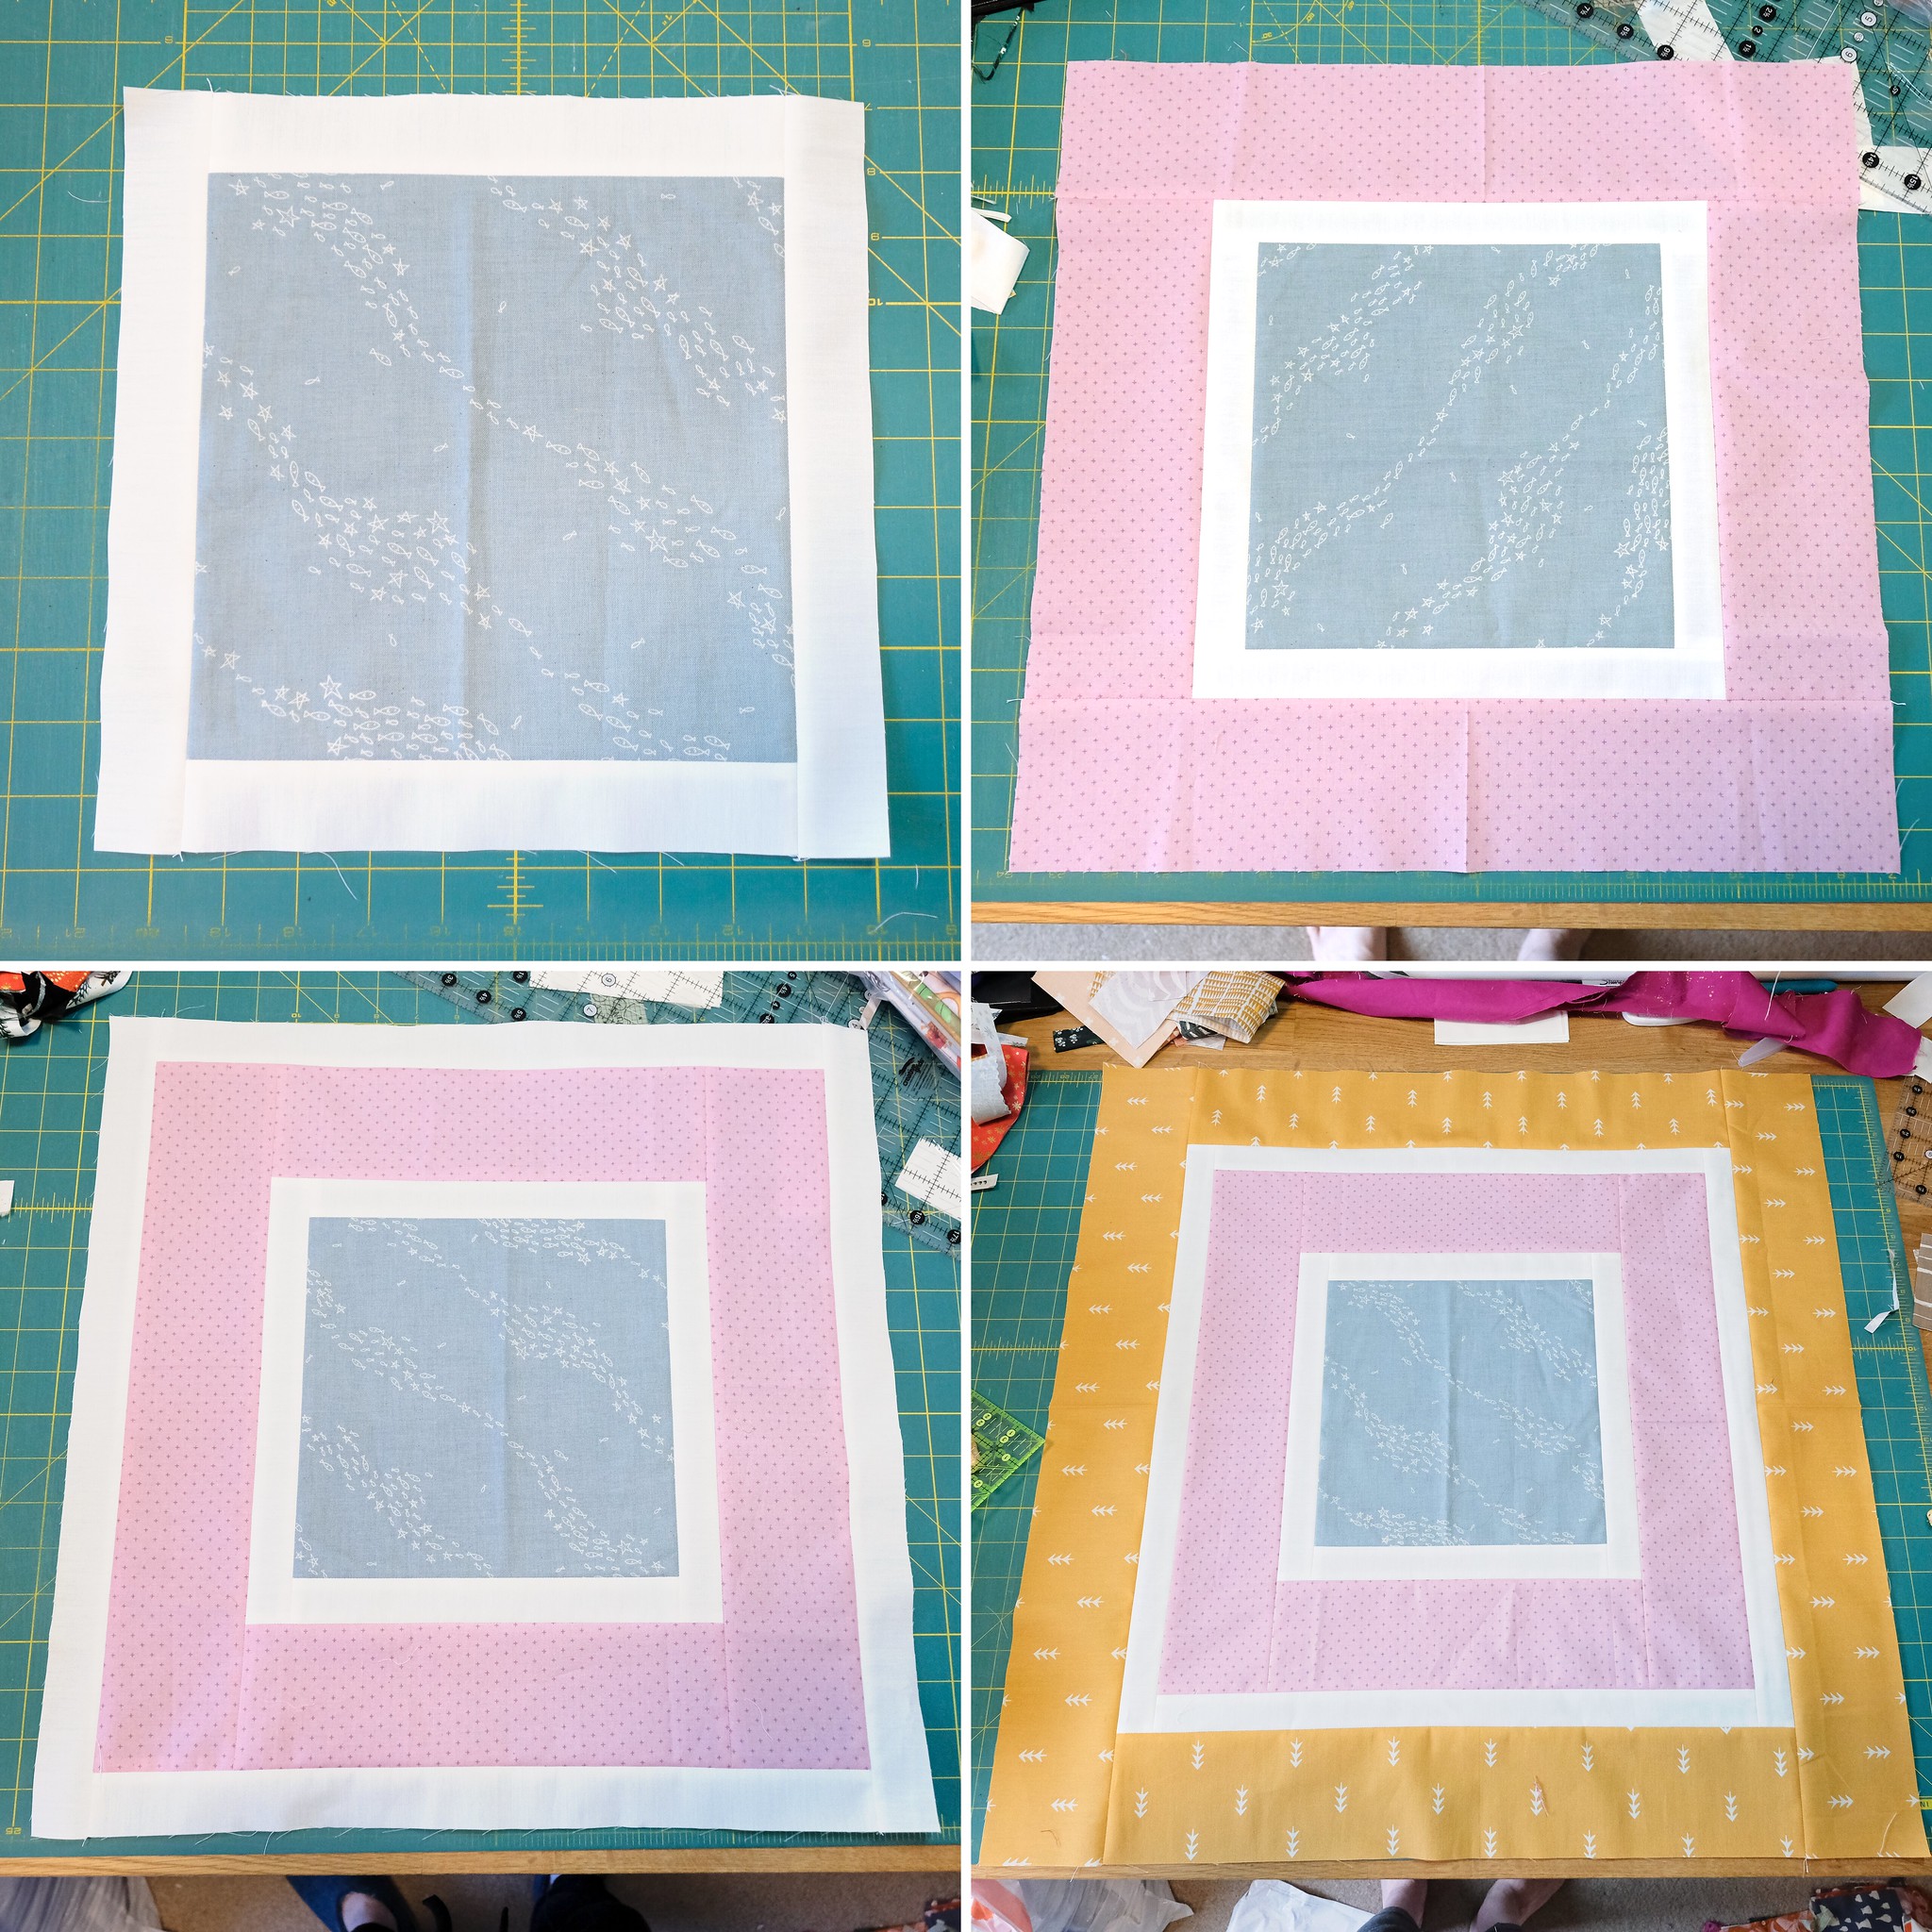 The Penny Quilt - Block Construction